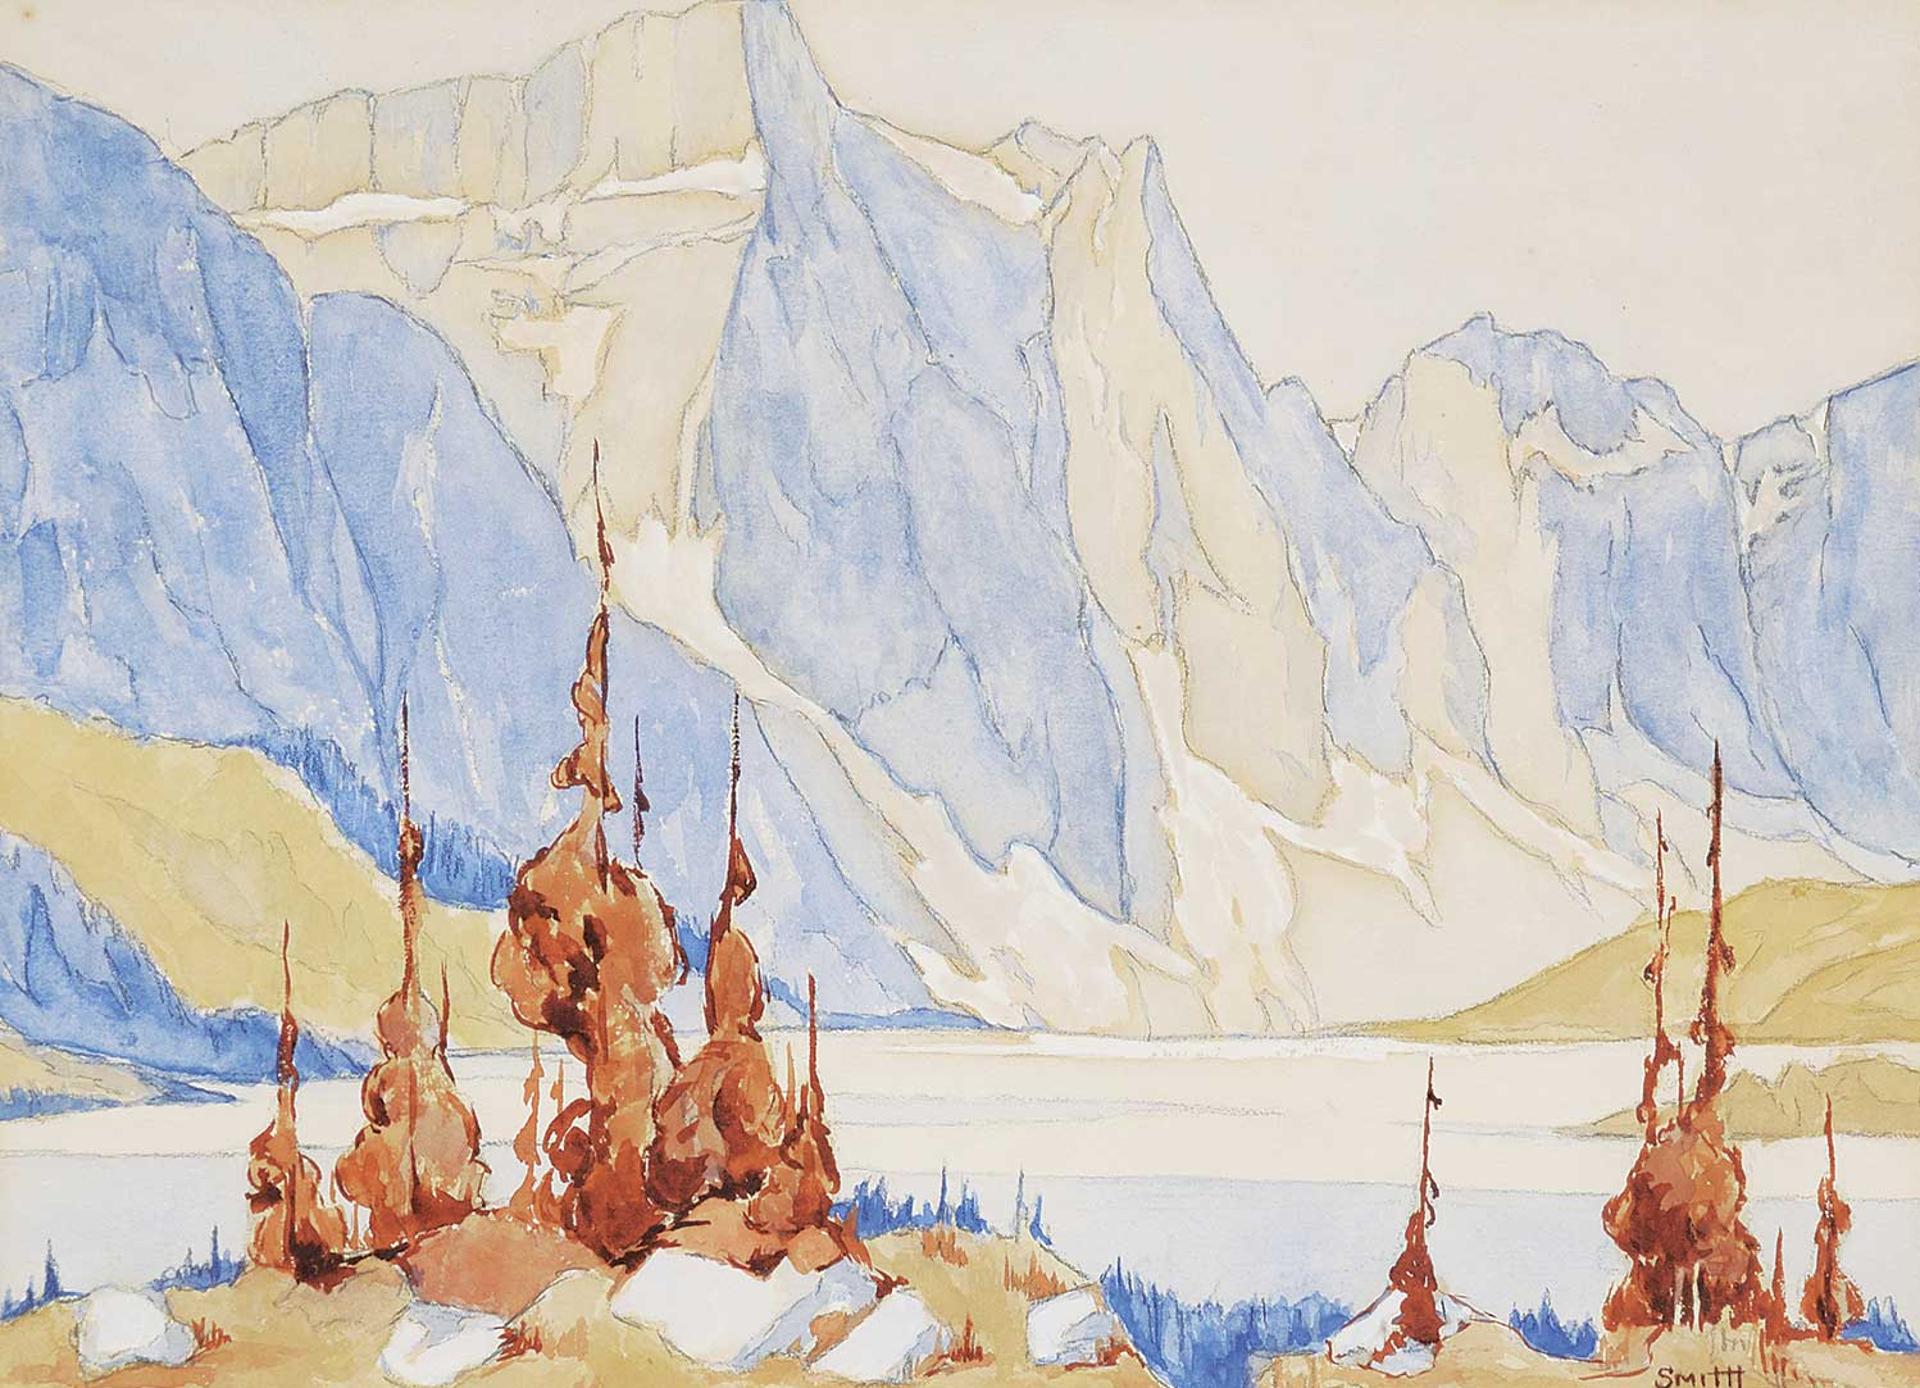 William St. Thomas Smith (1862-1947) - Untitled - Snow Melting in the Mountains